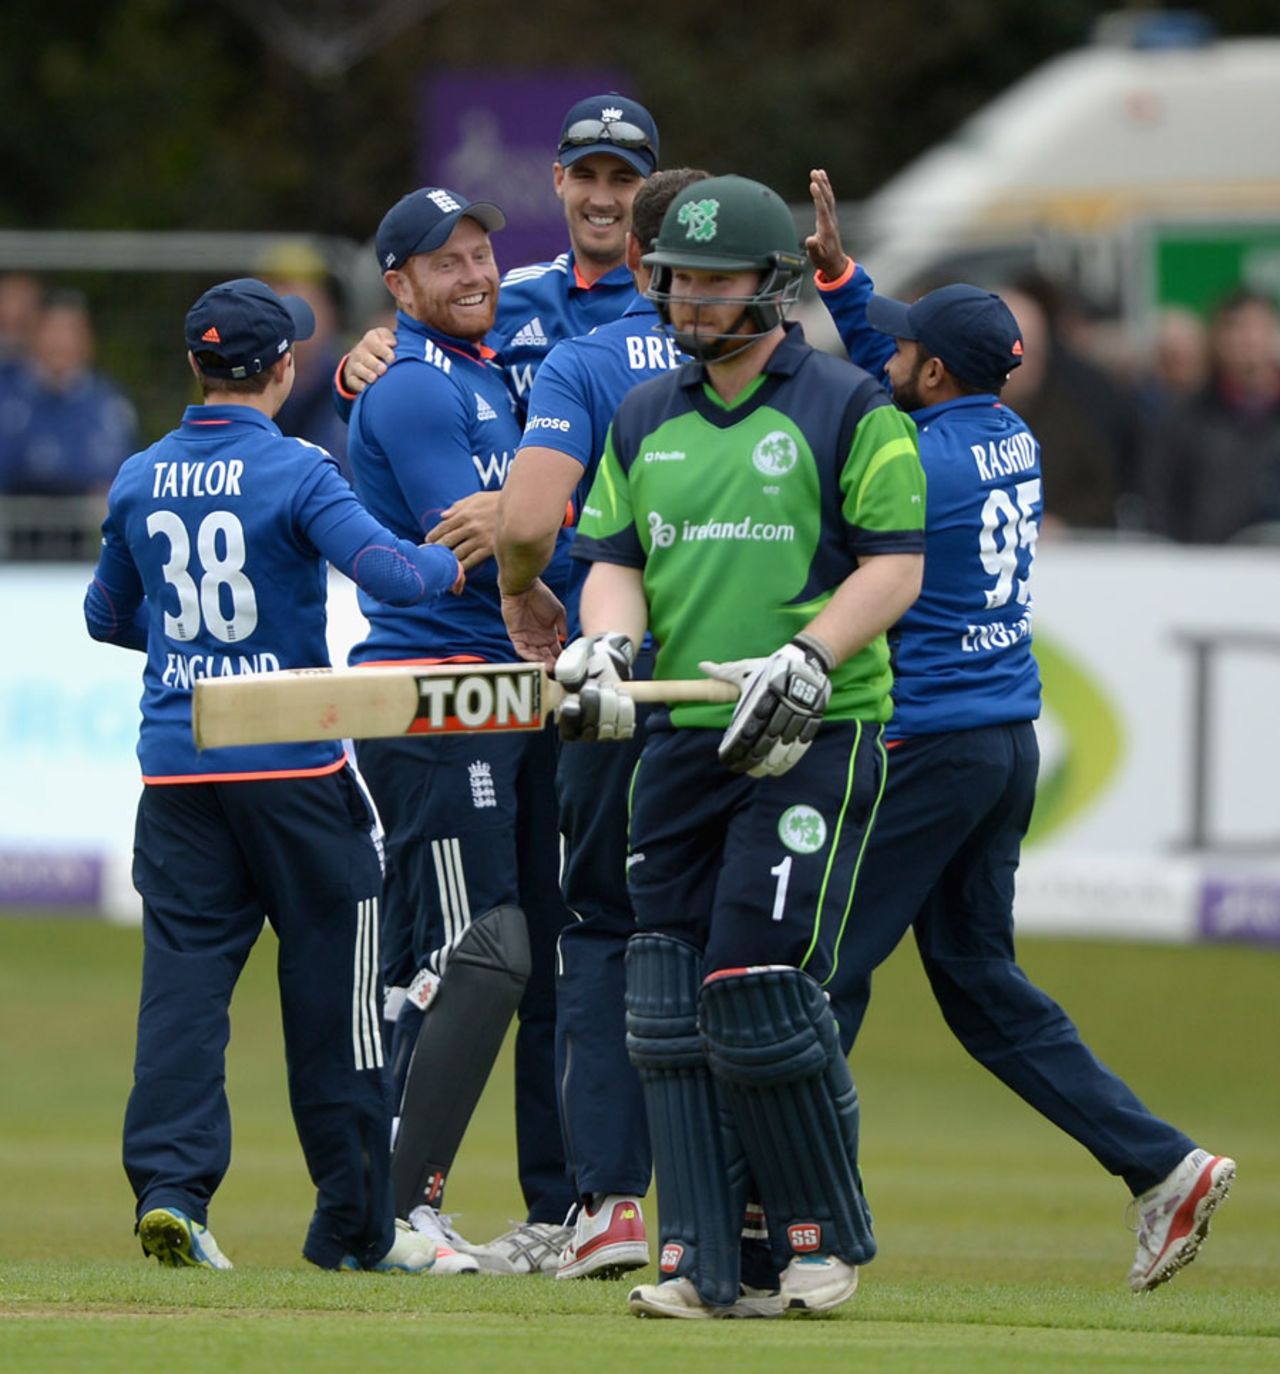 England celebrate Jonny Bairstow's run-out of Paul Stirling, Ireland v England, only ODI, Malahide, May 8, 2015